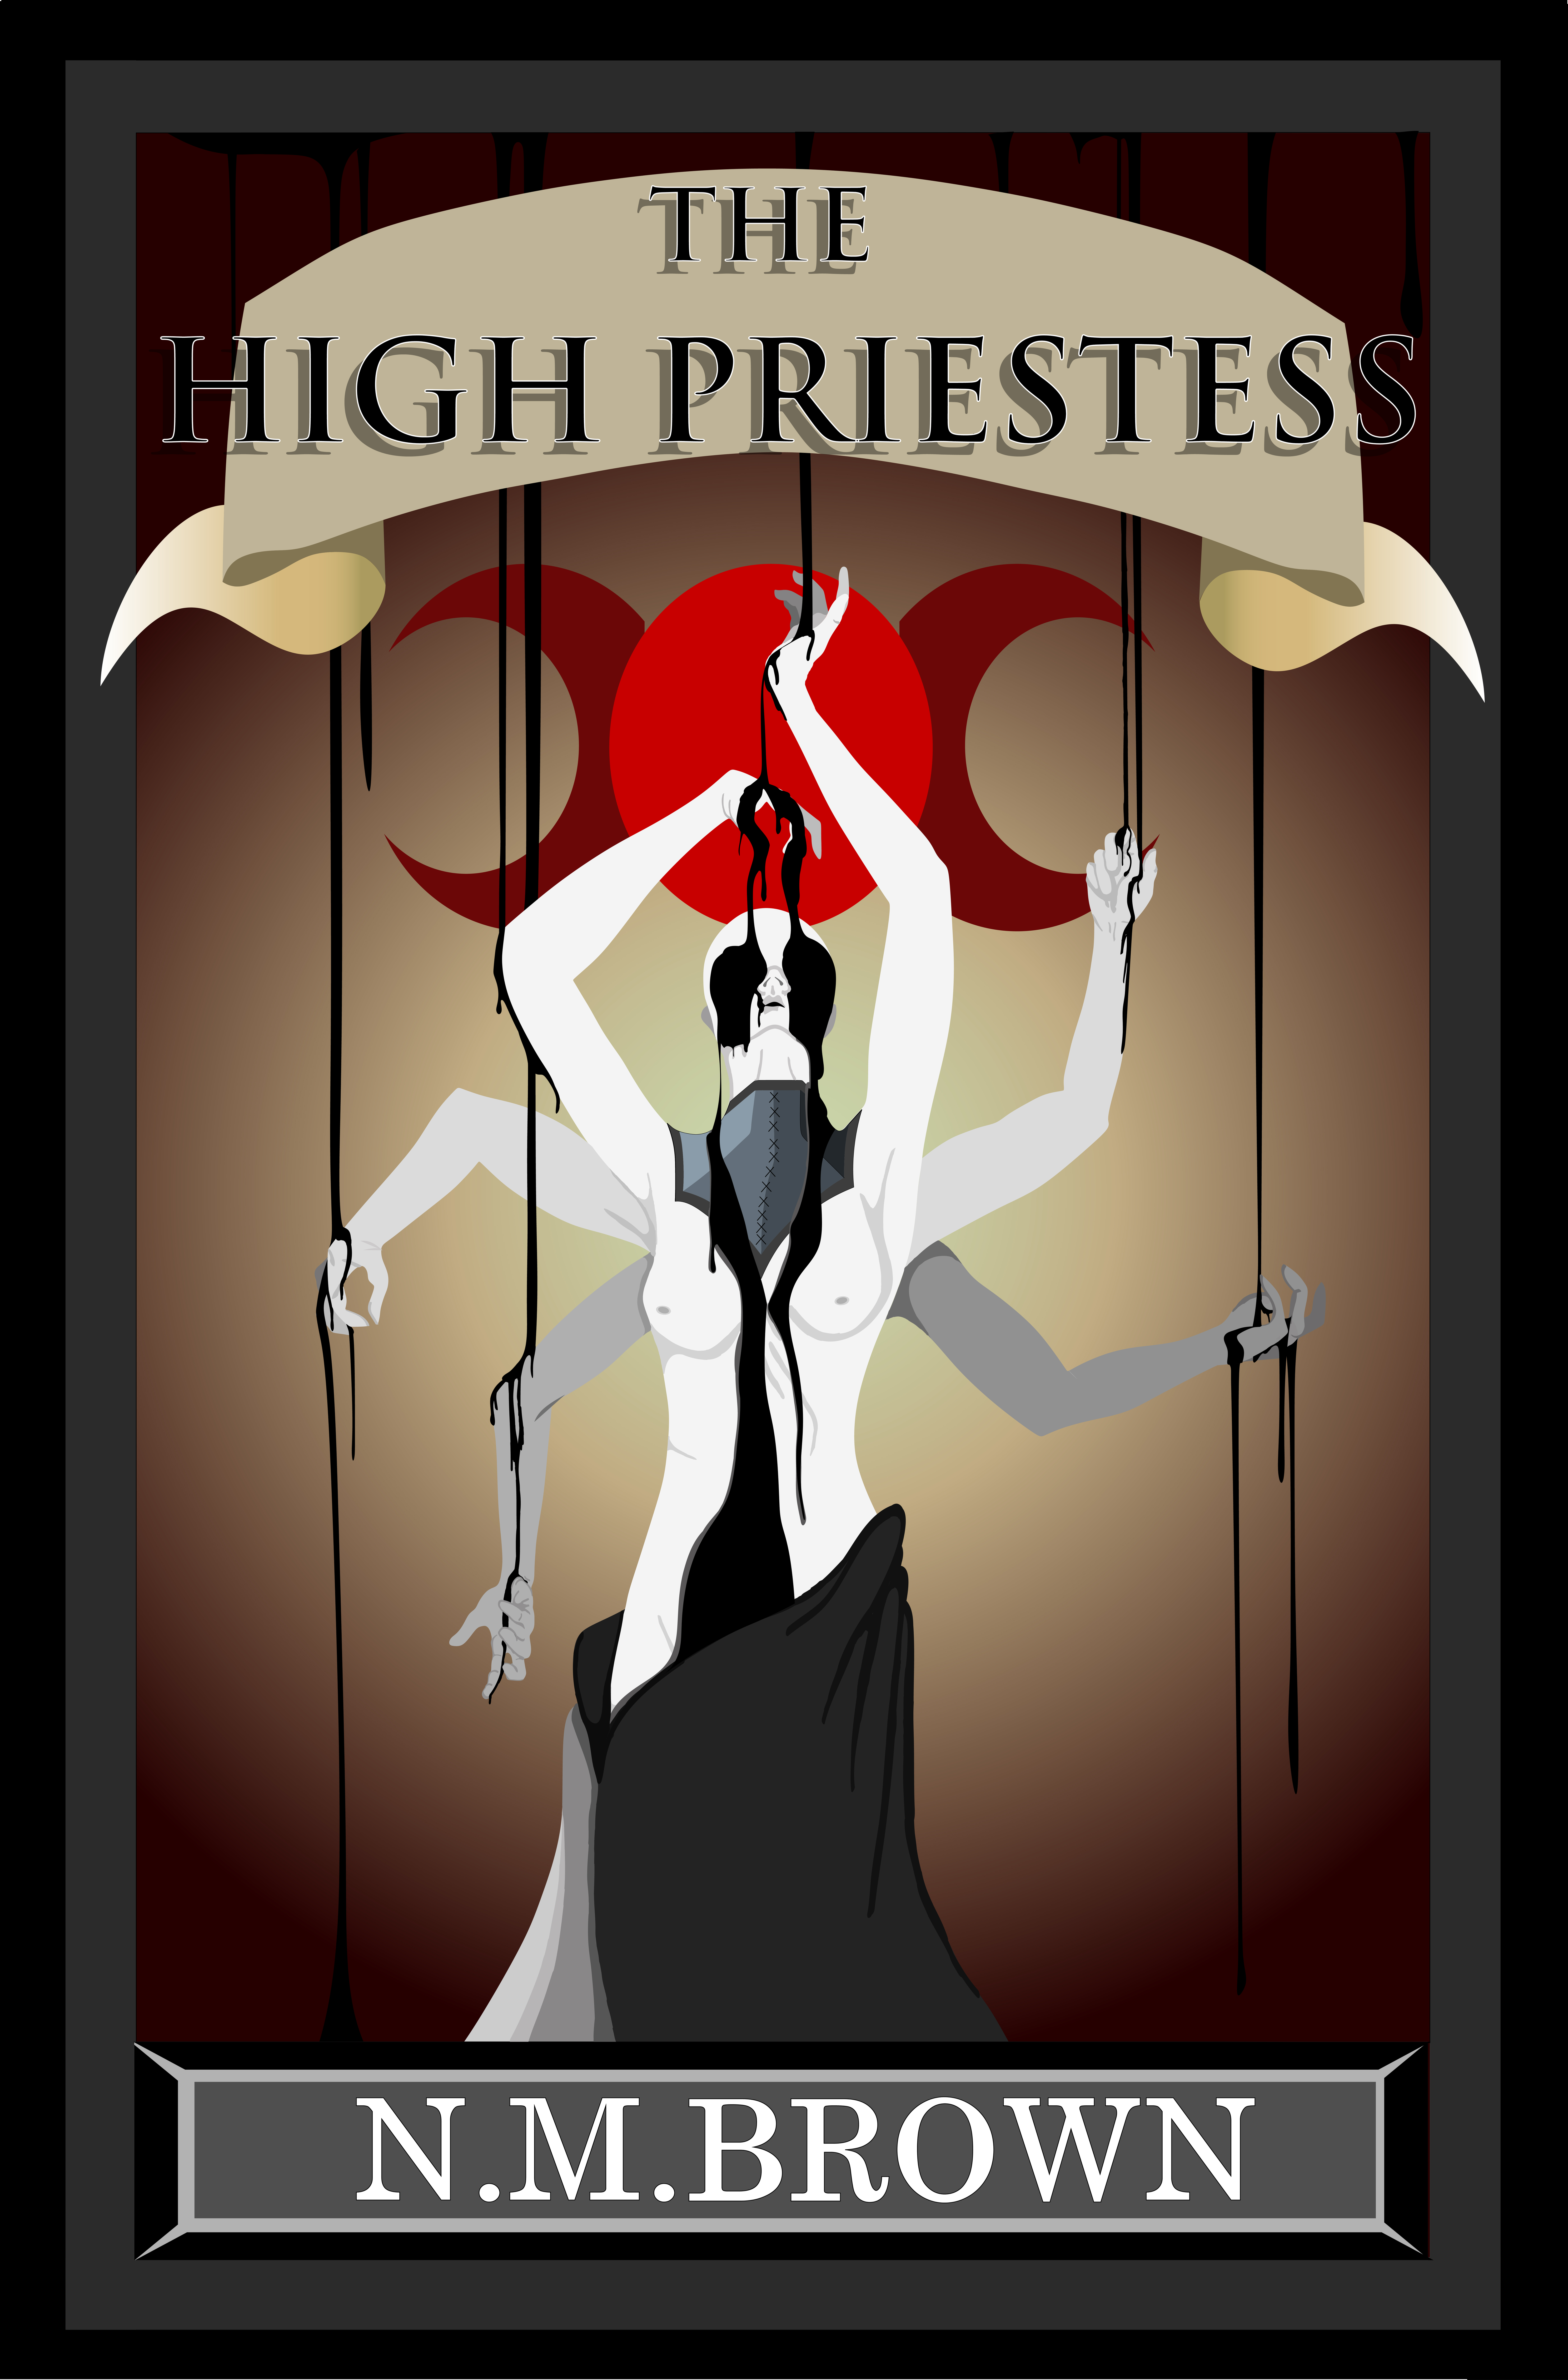 FREE: The High Priestess by N. M. Brown